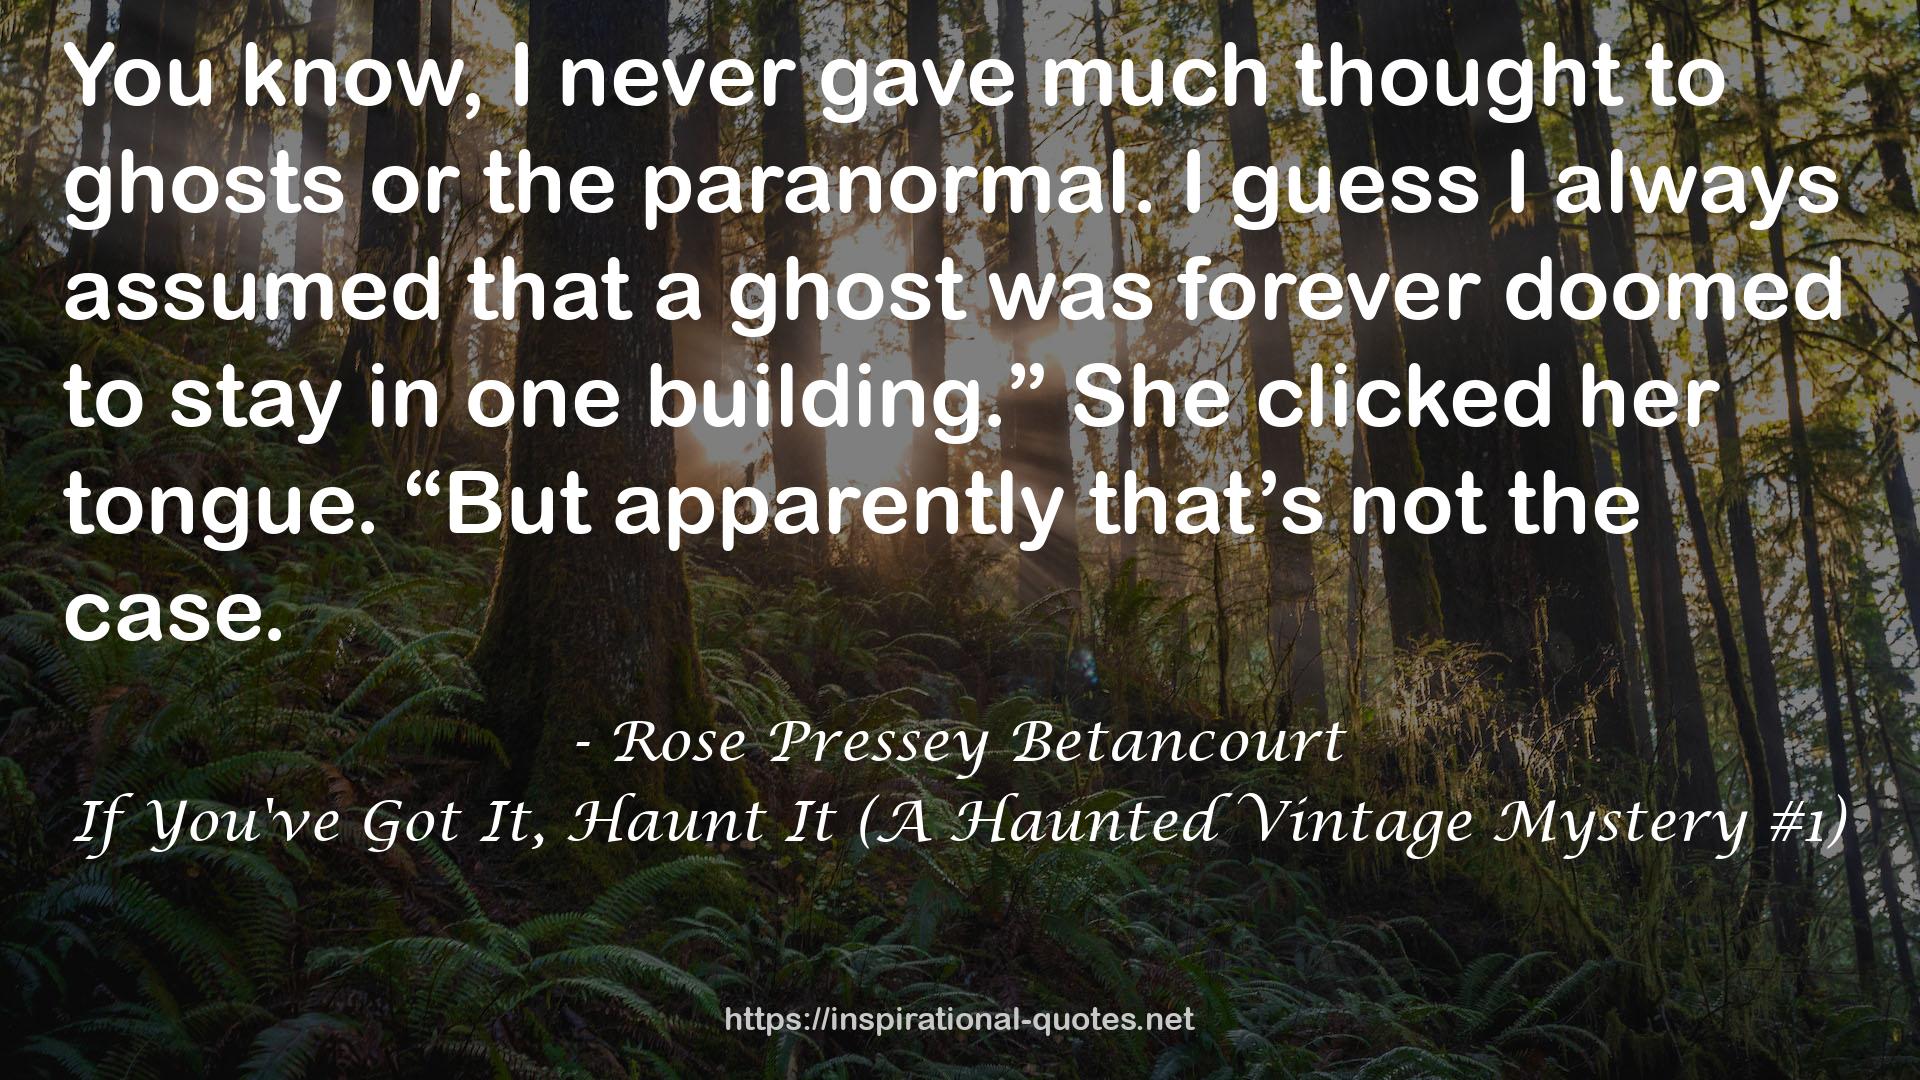 If You've Got It, Haunt It (A Haunted Vintage Mystery #1) QUOTES